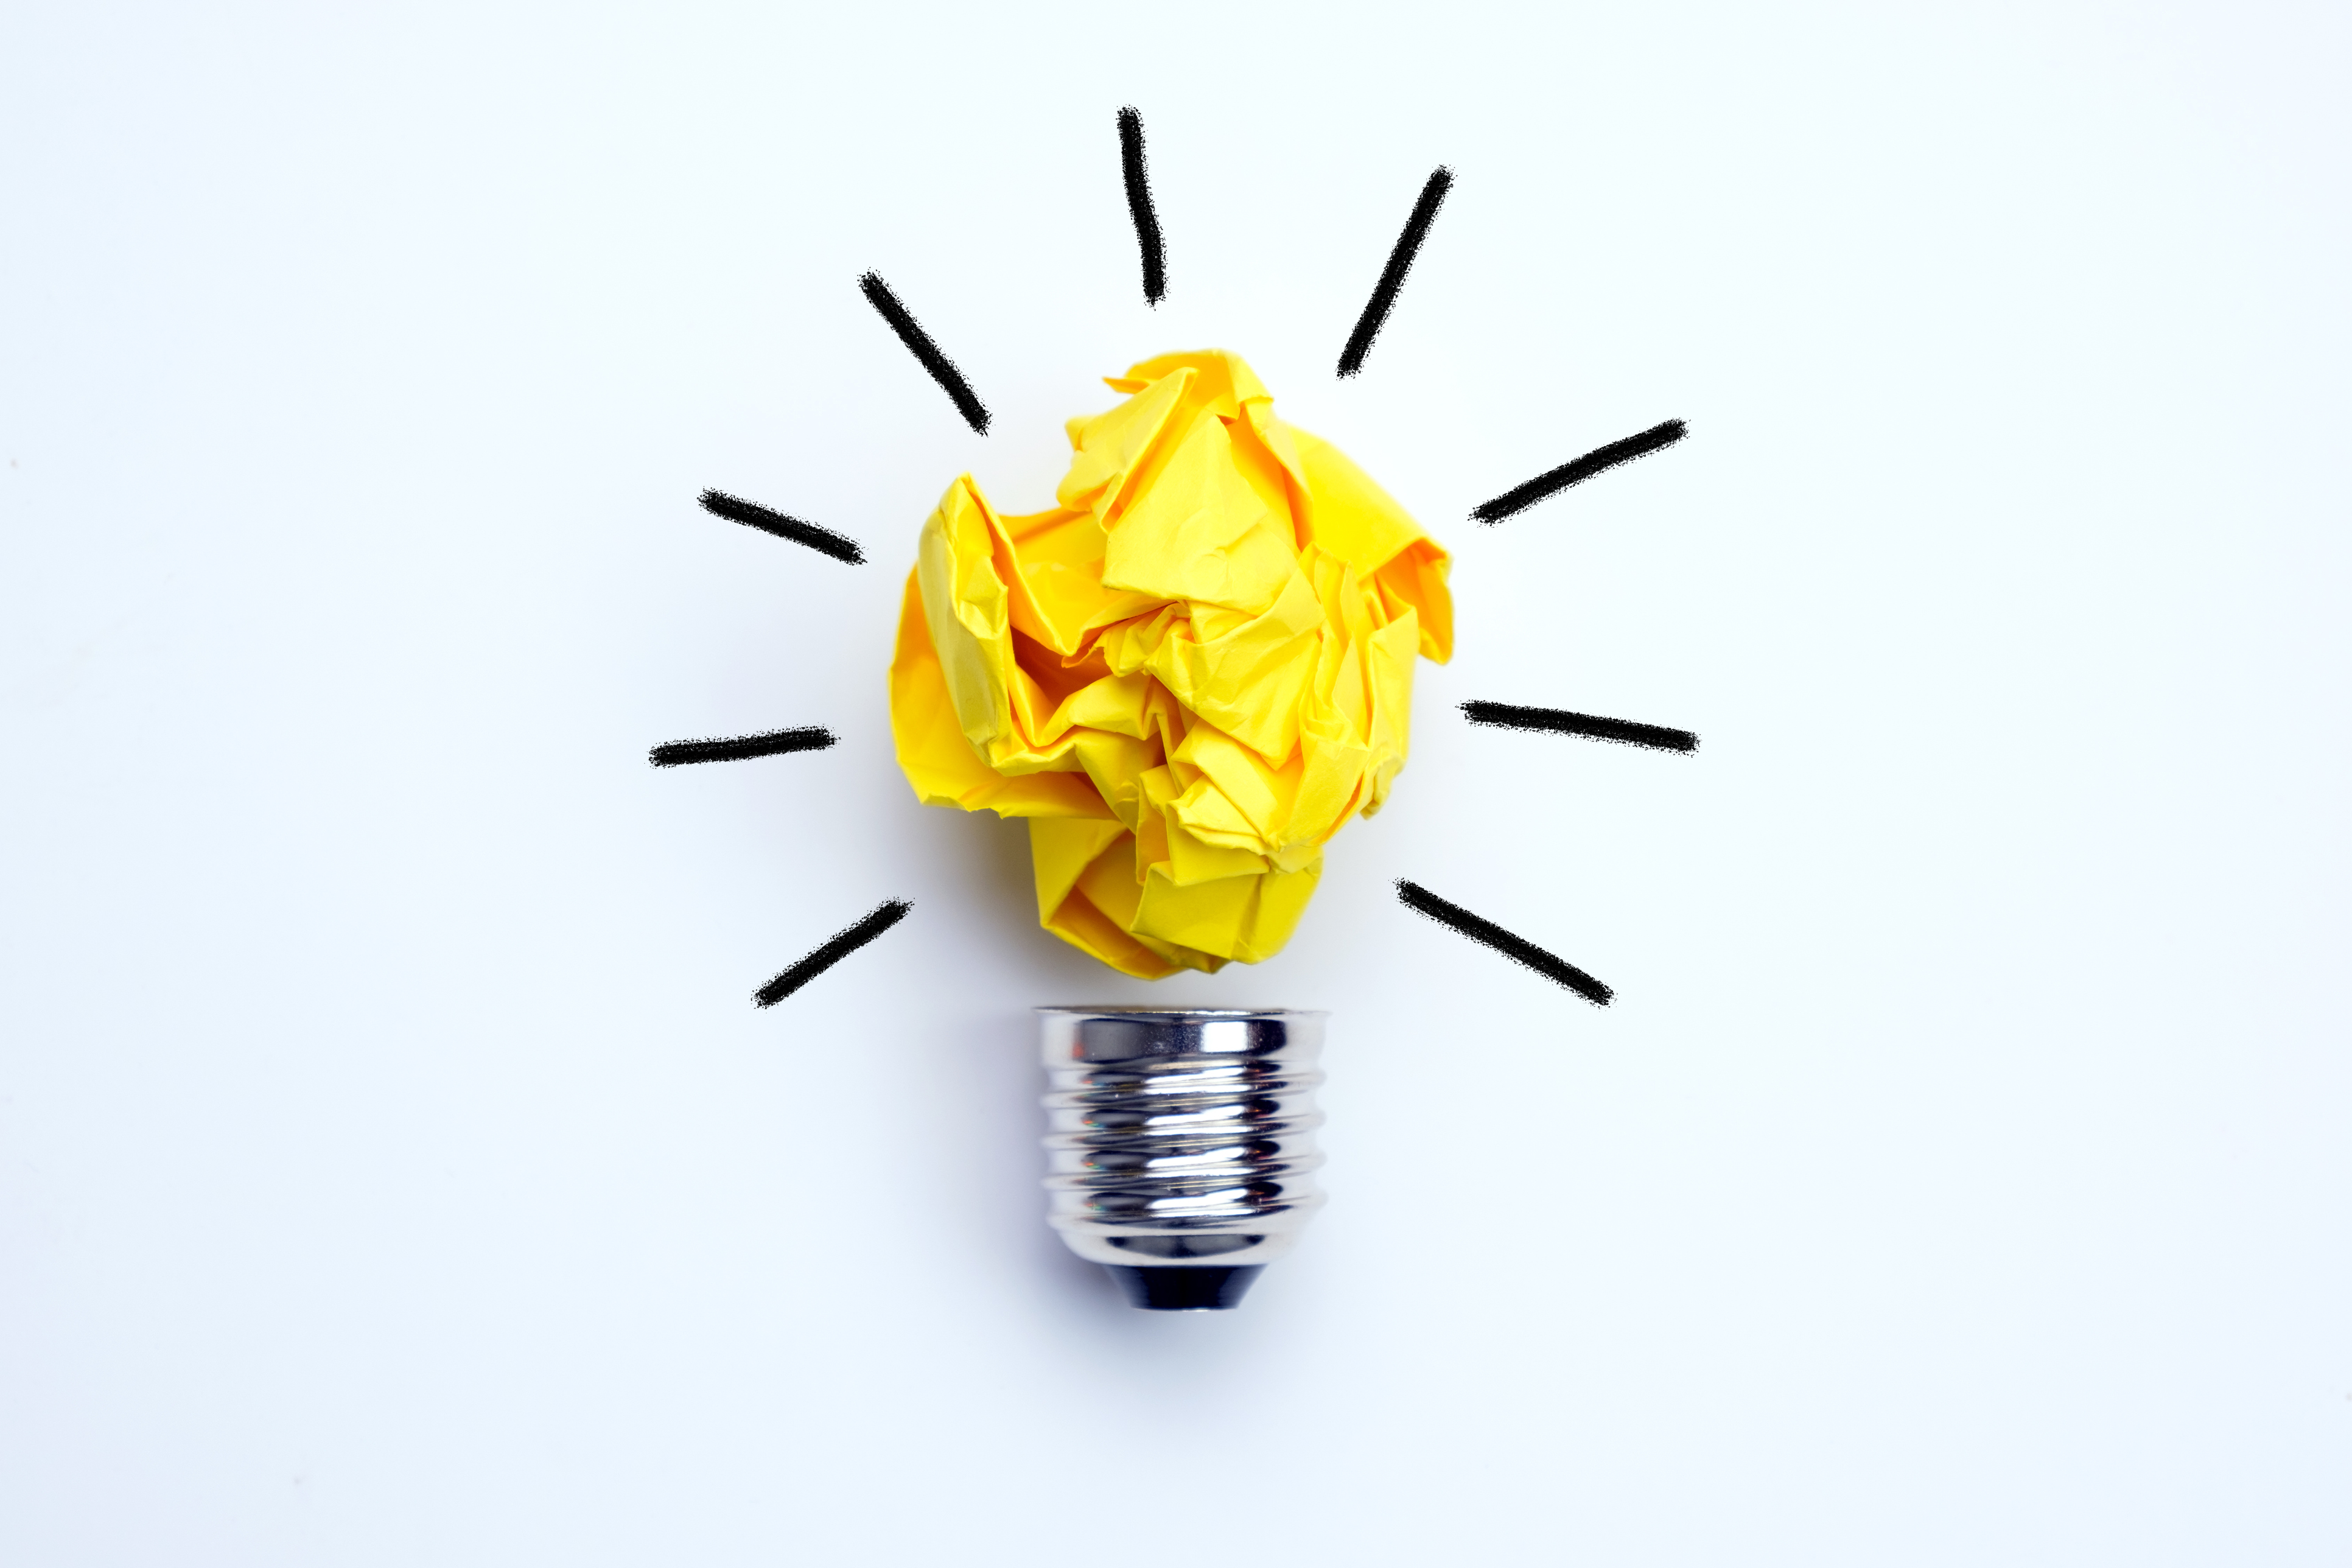 Illustration of a shining light bulb made from yellow folded paper